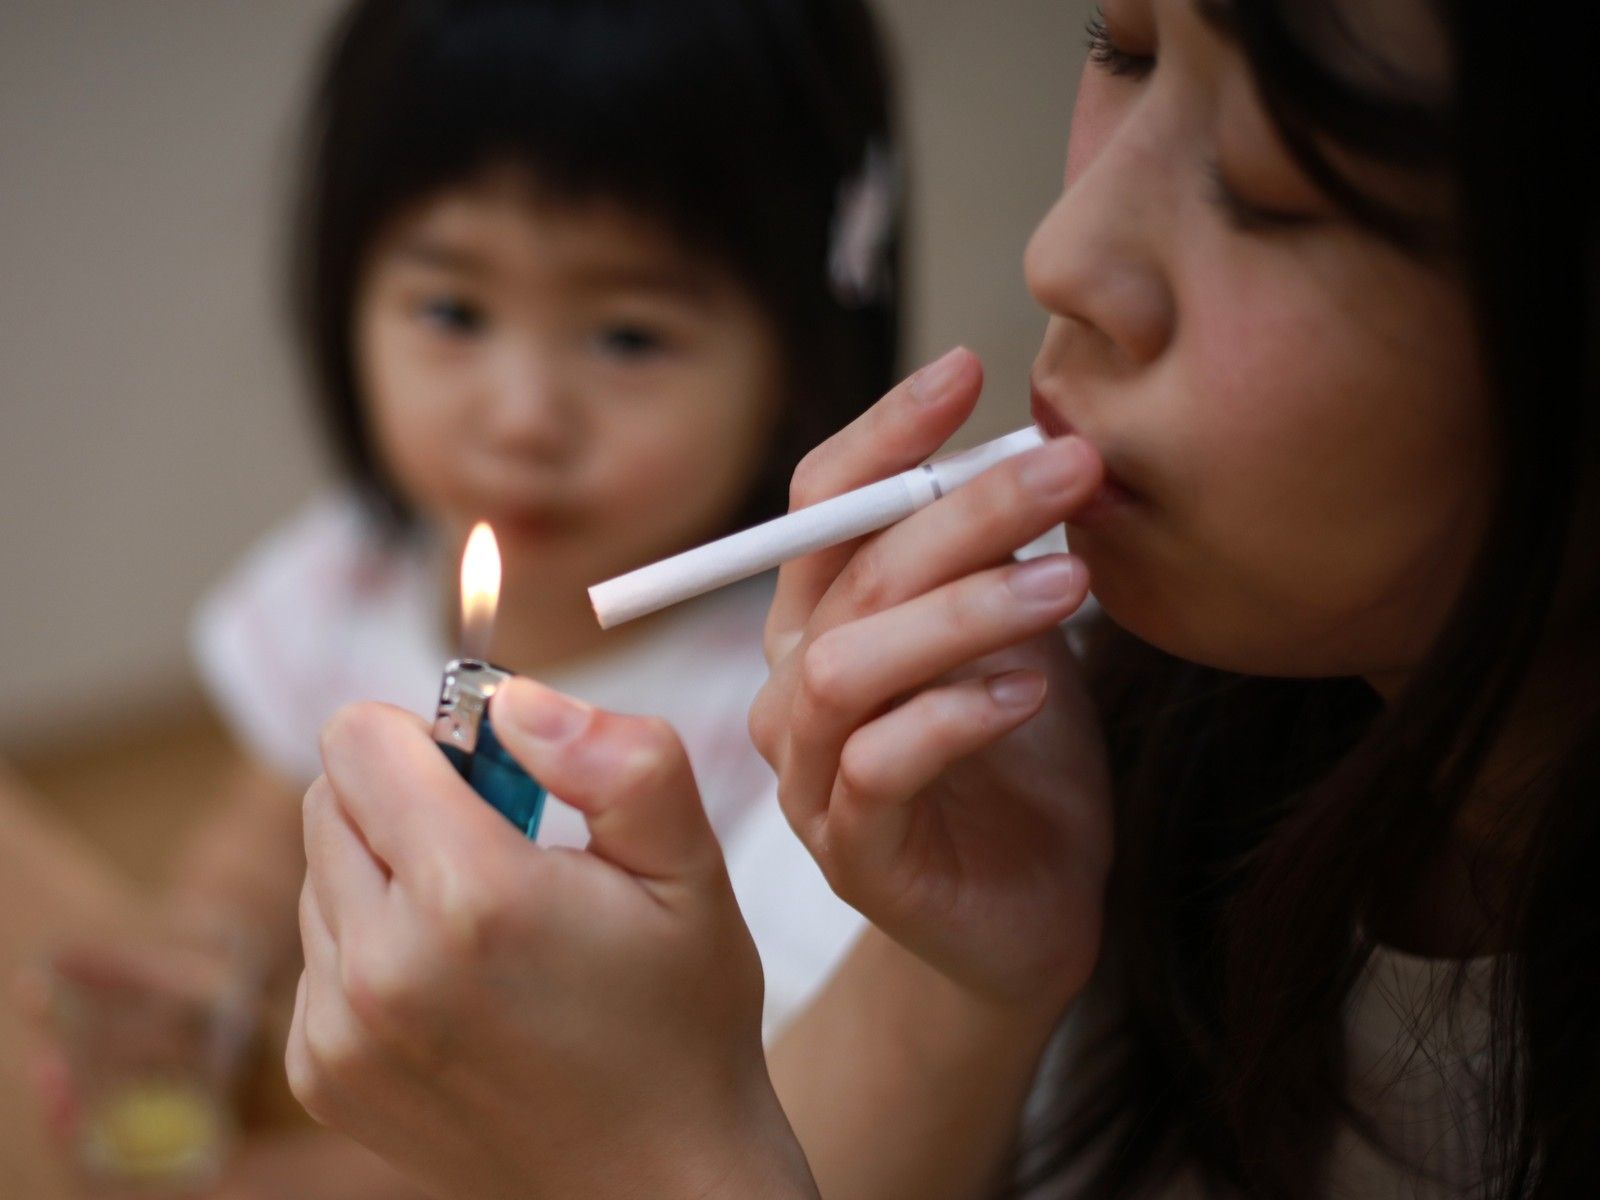 The study also looks at the “potential direct influence” with the risk of RA further increasing among children who become smokers themselves in adulthood.